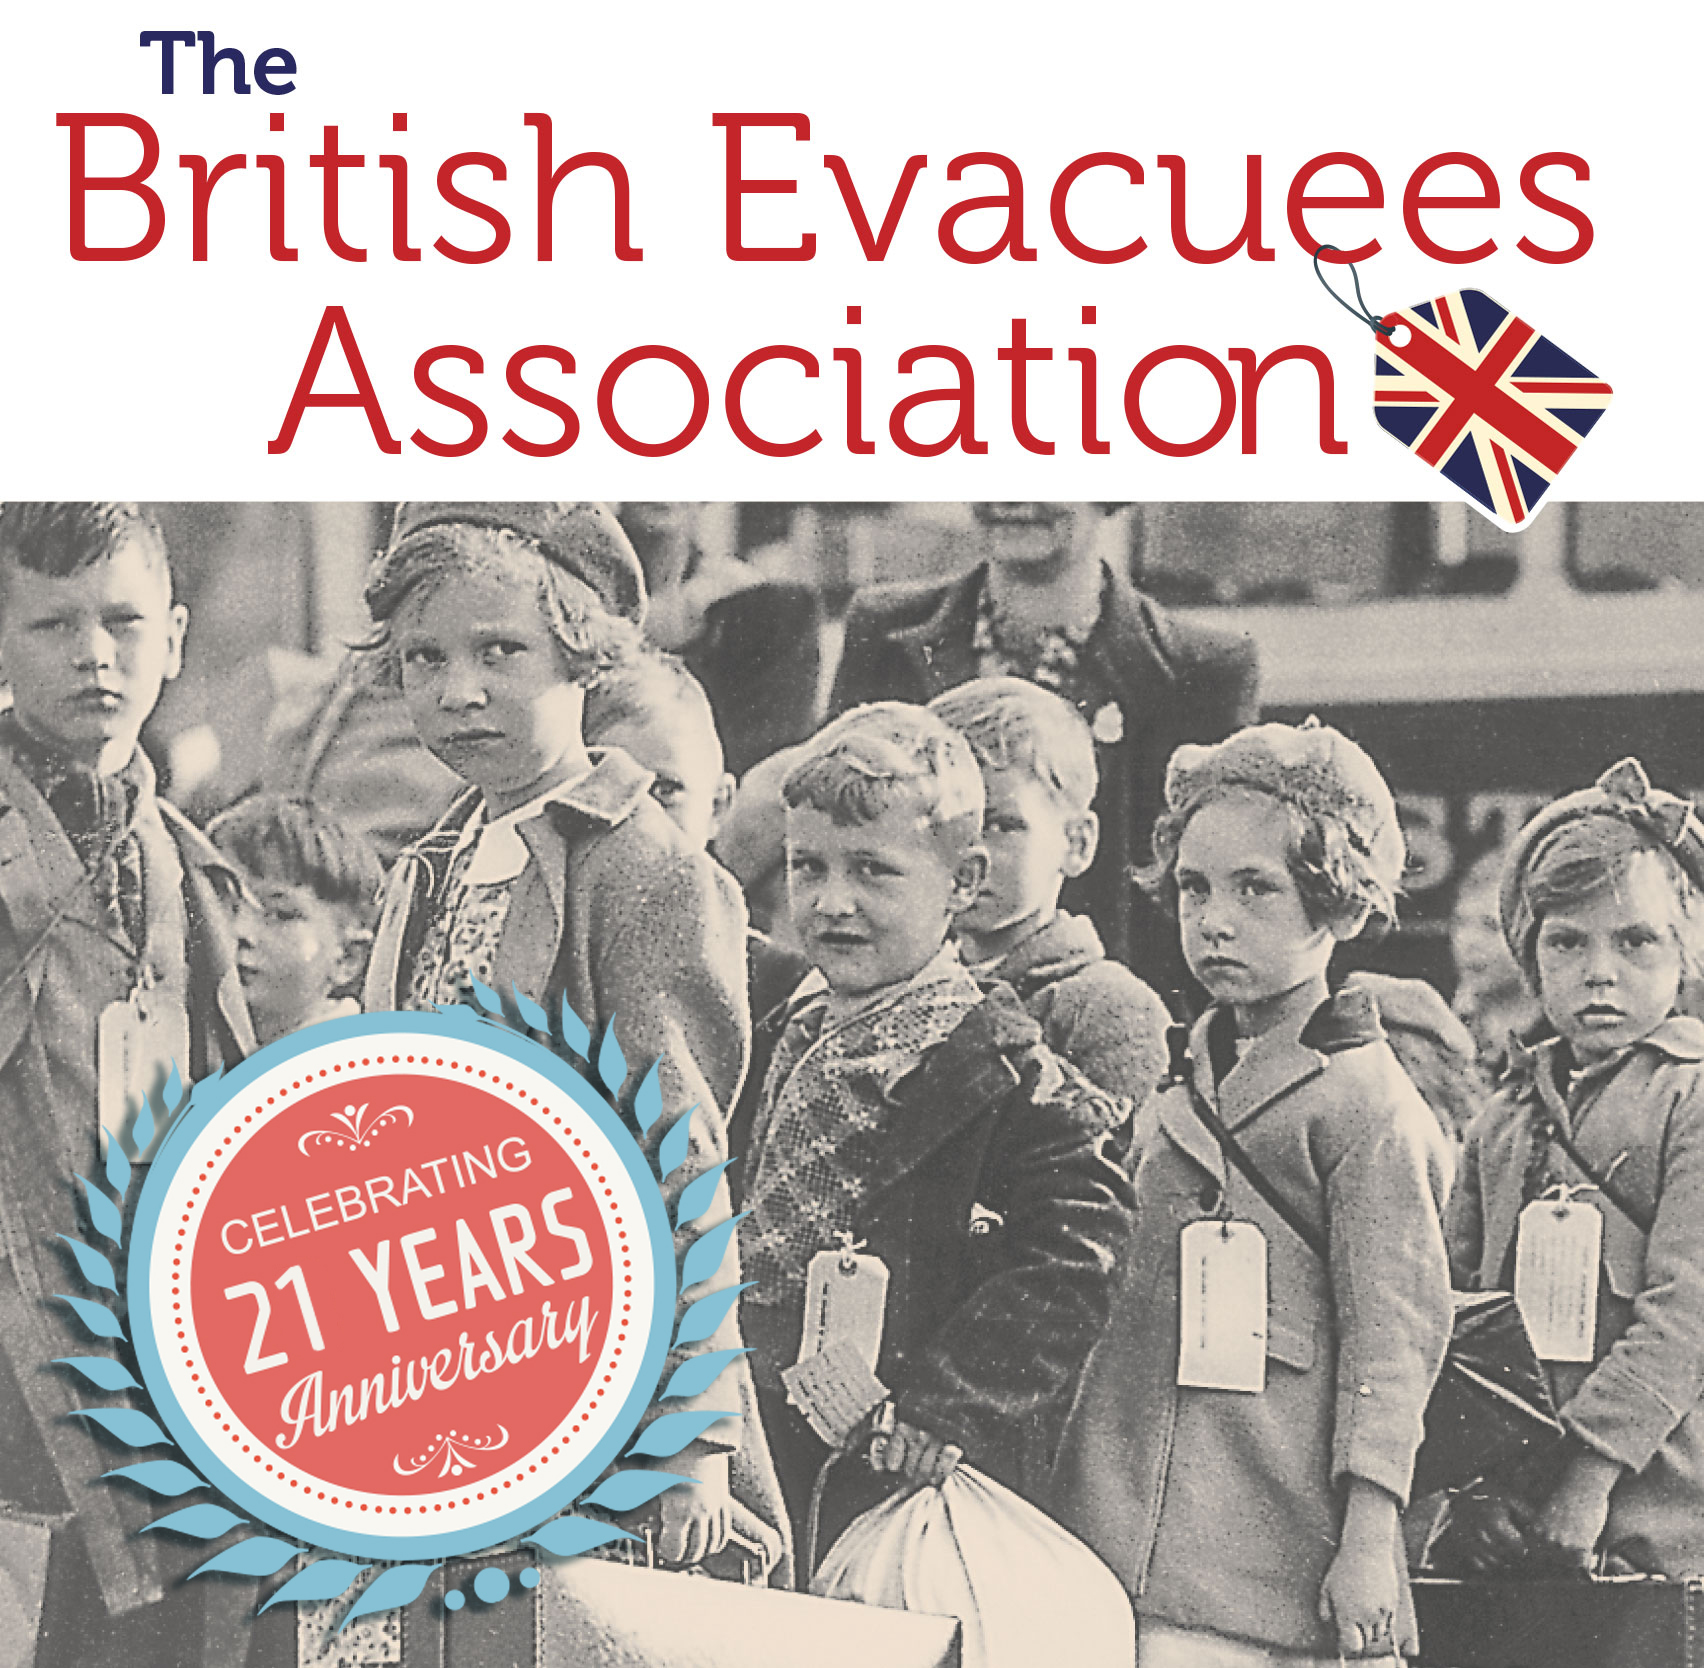 The British Evacuee Association, a non profit registered charity for the evacuated children during the second world war